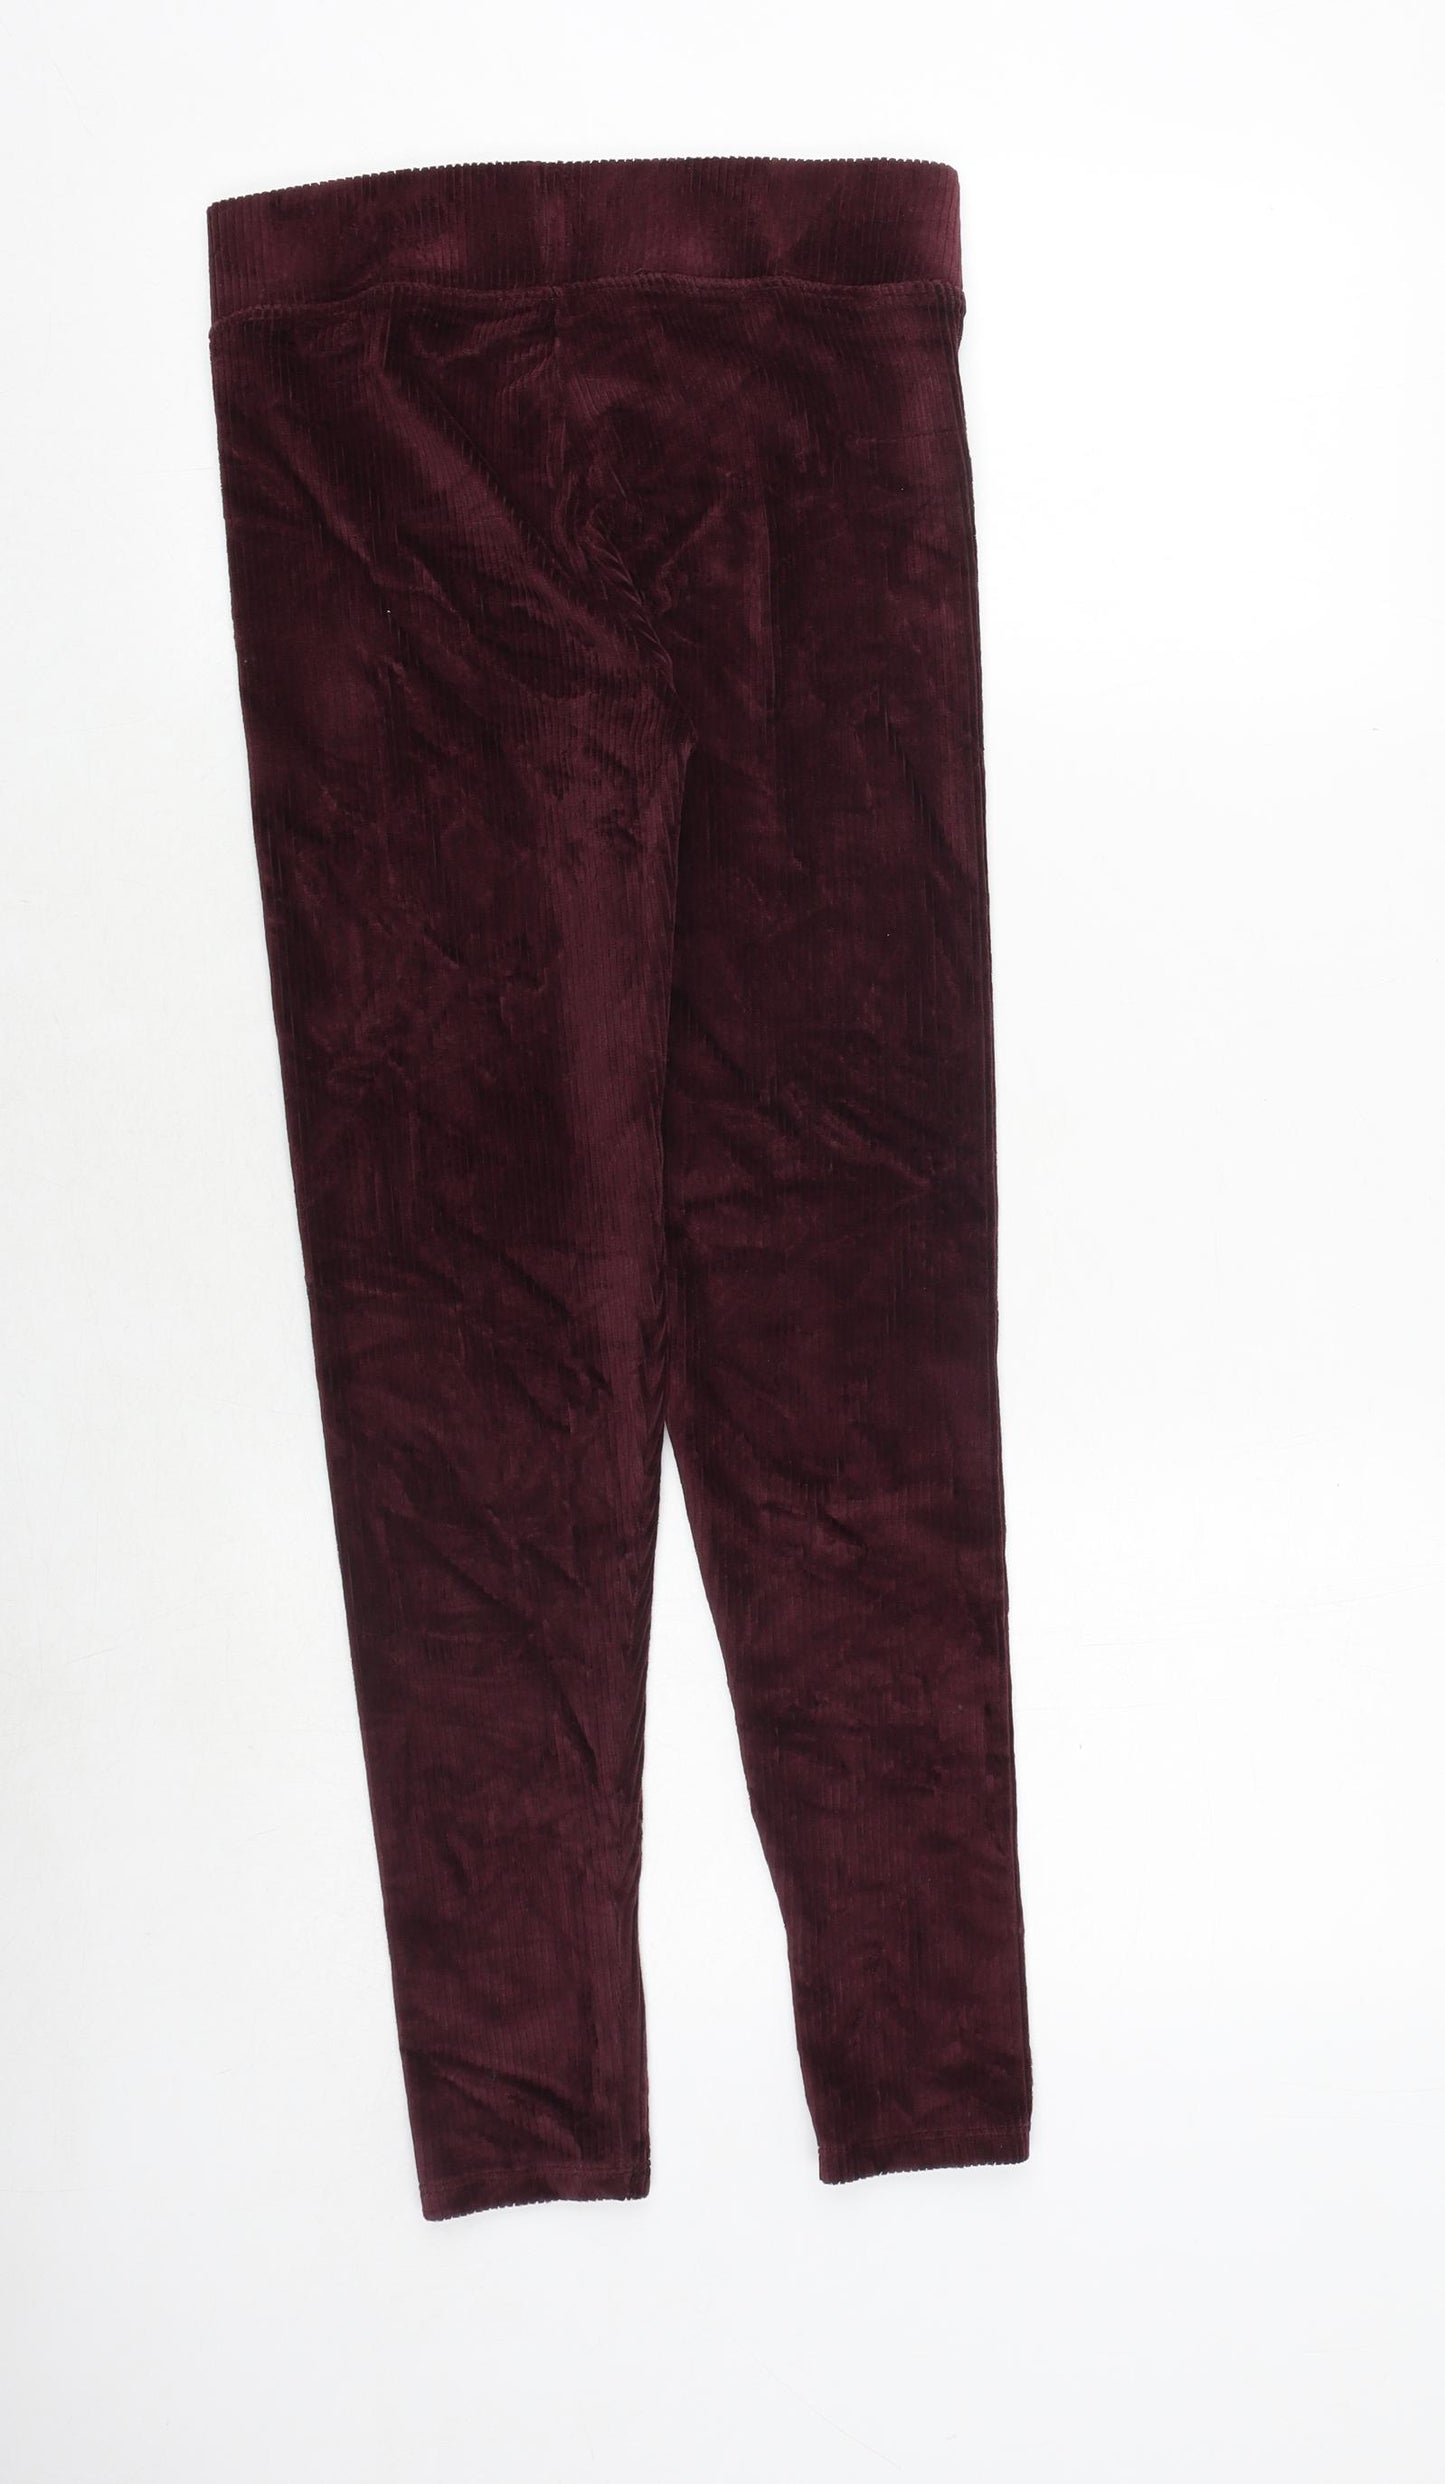 Marks and Spencer Womens Purple Cotton Trousers Size 8 Regular